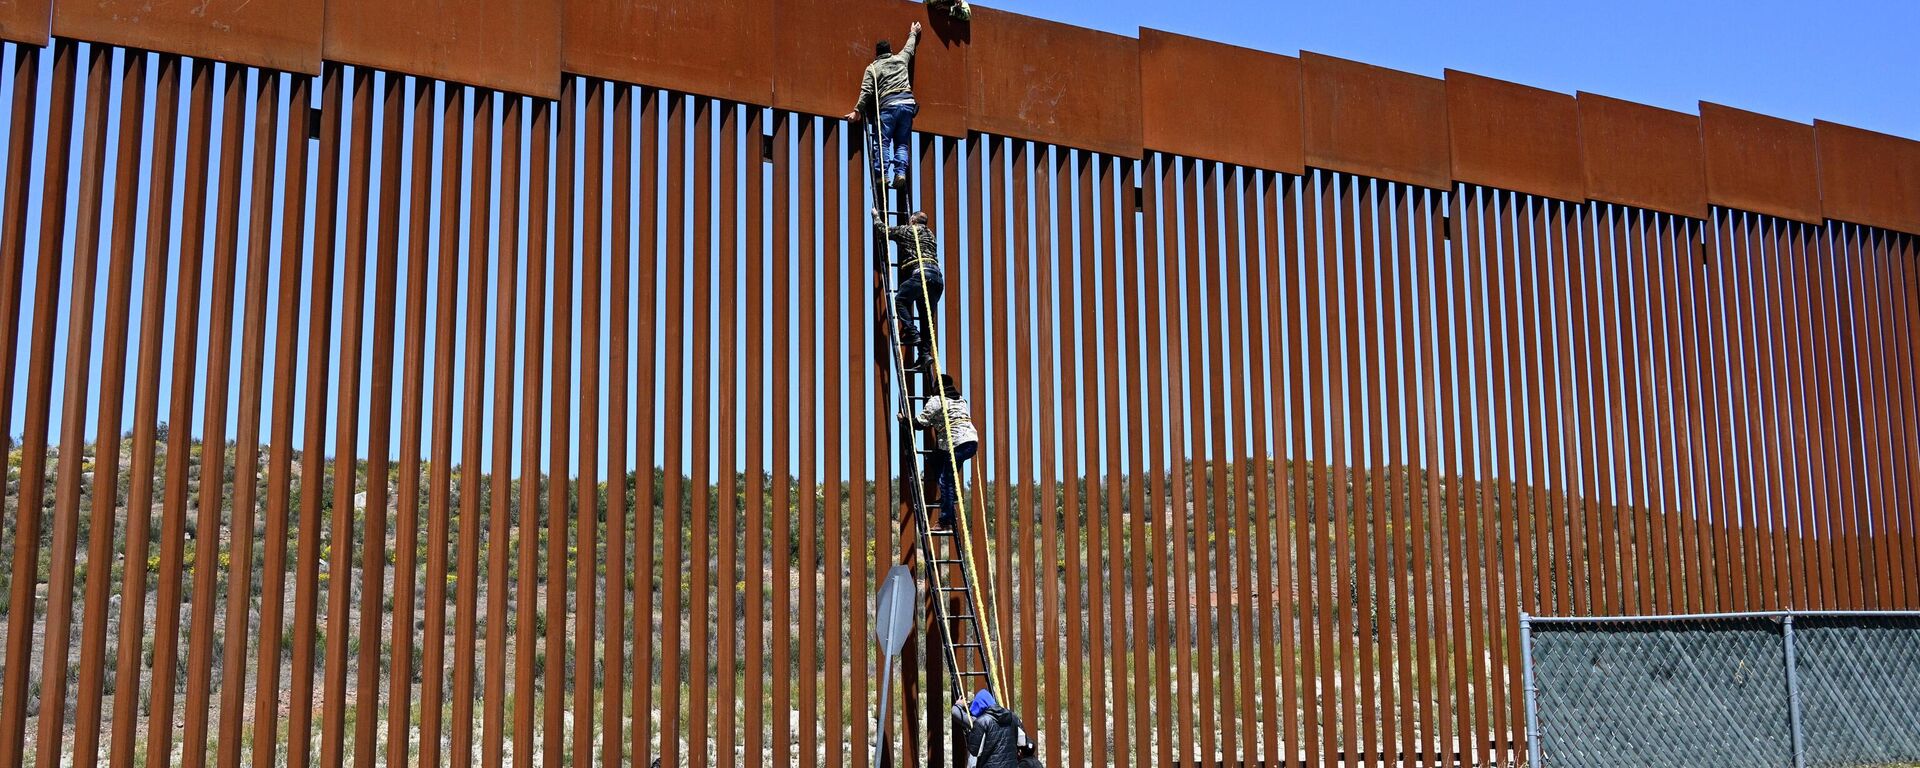 People use a ladder to scale the border fence at the US/Mexico border in Tecate, Mexico, Thursday, April 21, 2022. - Sputnik International, 1920, 23.09.2022